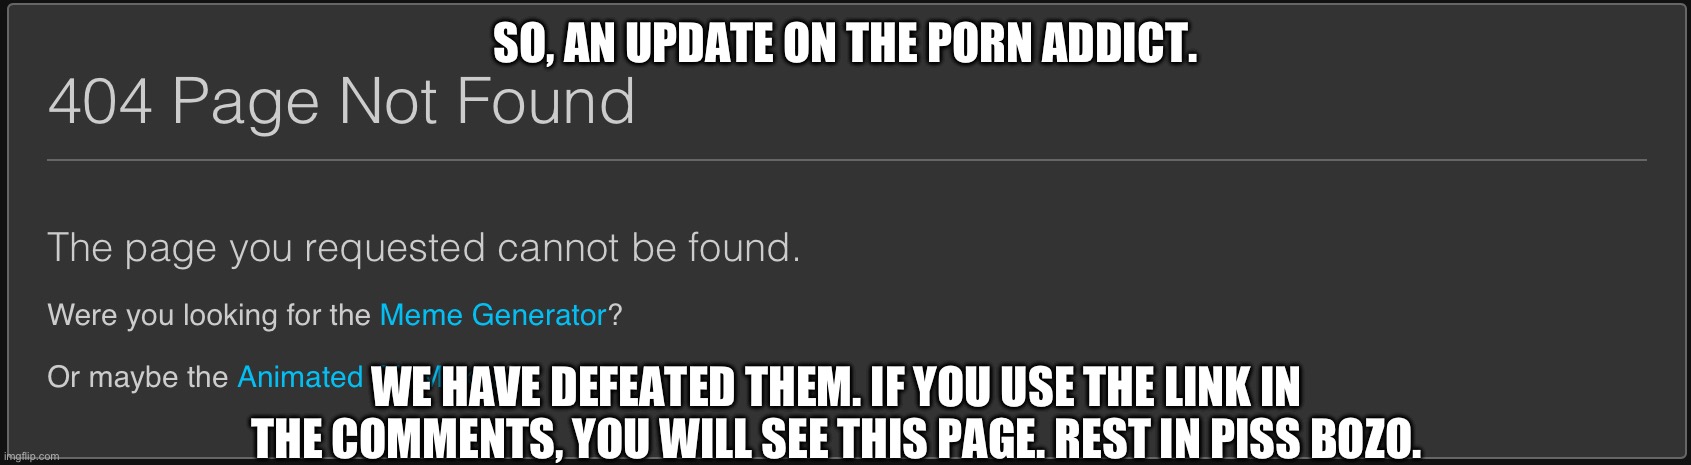 Yes, an update. | SO, AN UPDATE ON THE PORN ADDICT. WE HAVE DEFEATED THEM. IF YOU USE THE LINK IN THE COMMENTS, YOU WILL SEE THIS PAGE. REST IN PISS BOZO. | made w/ Imgflip meme maker